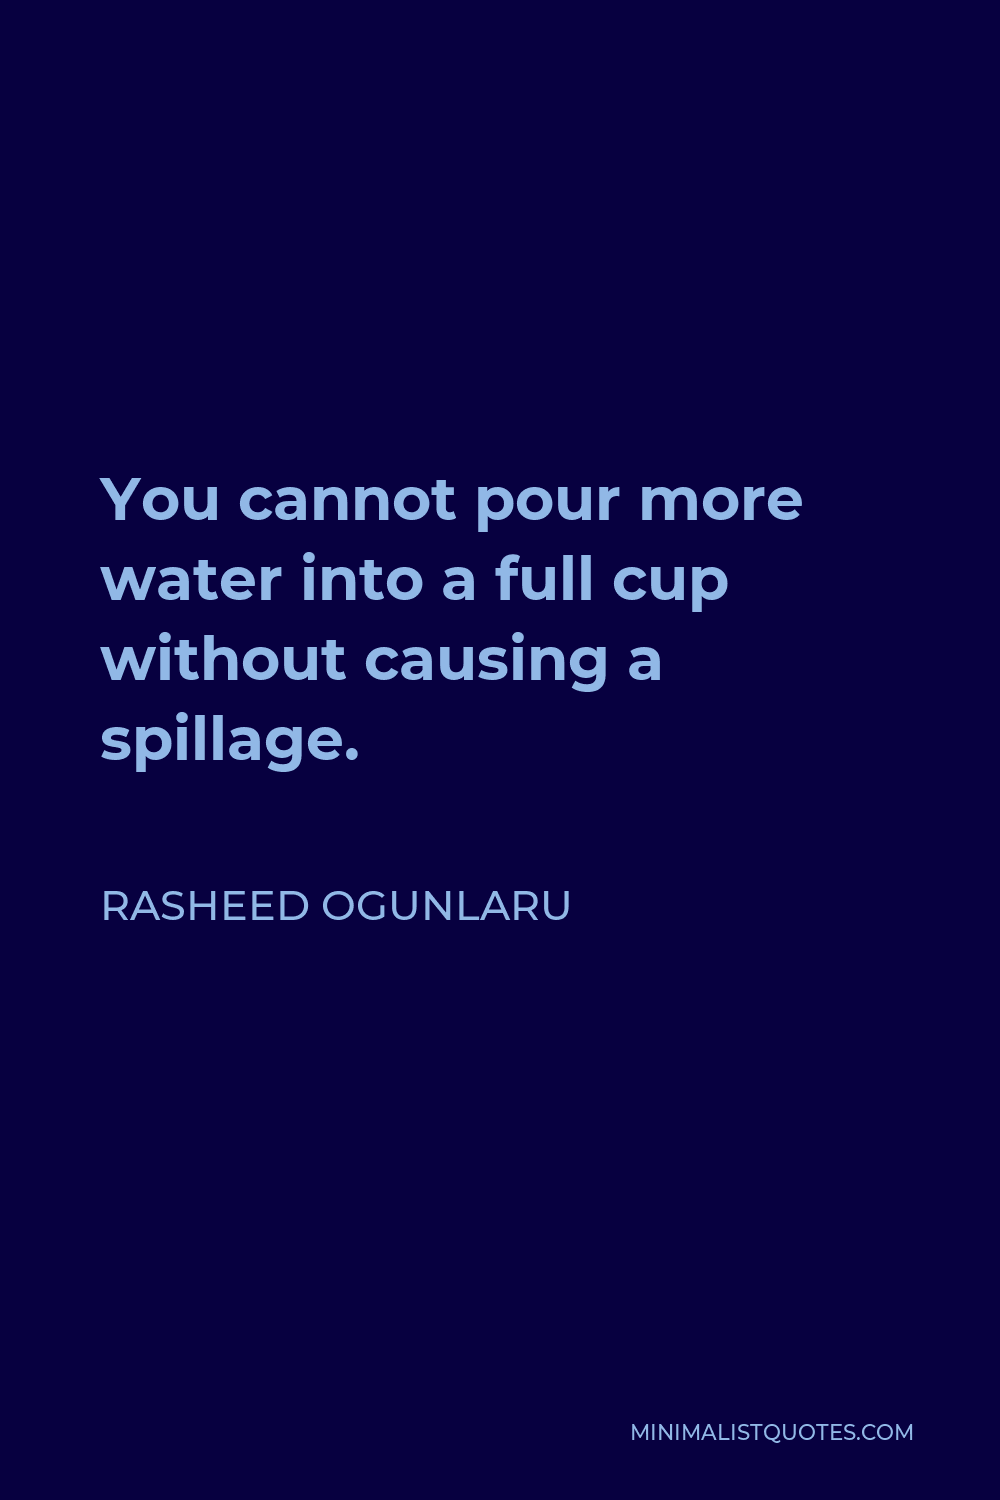 Rasheed Ogunlaru Quote - You cannot pour more water into a full cup without causing a spillage.